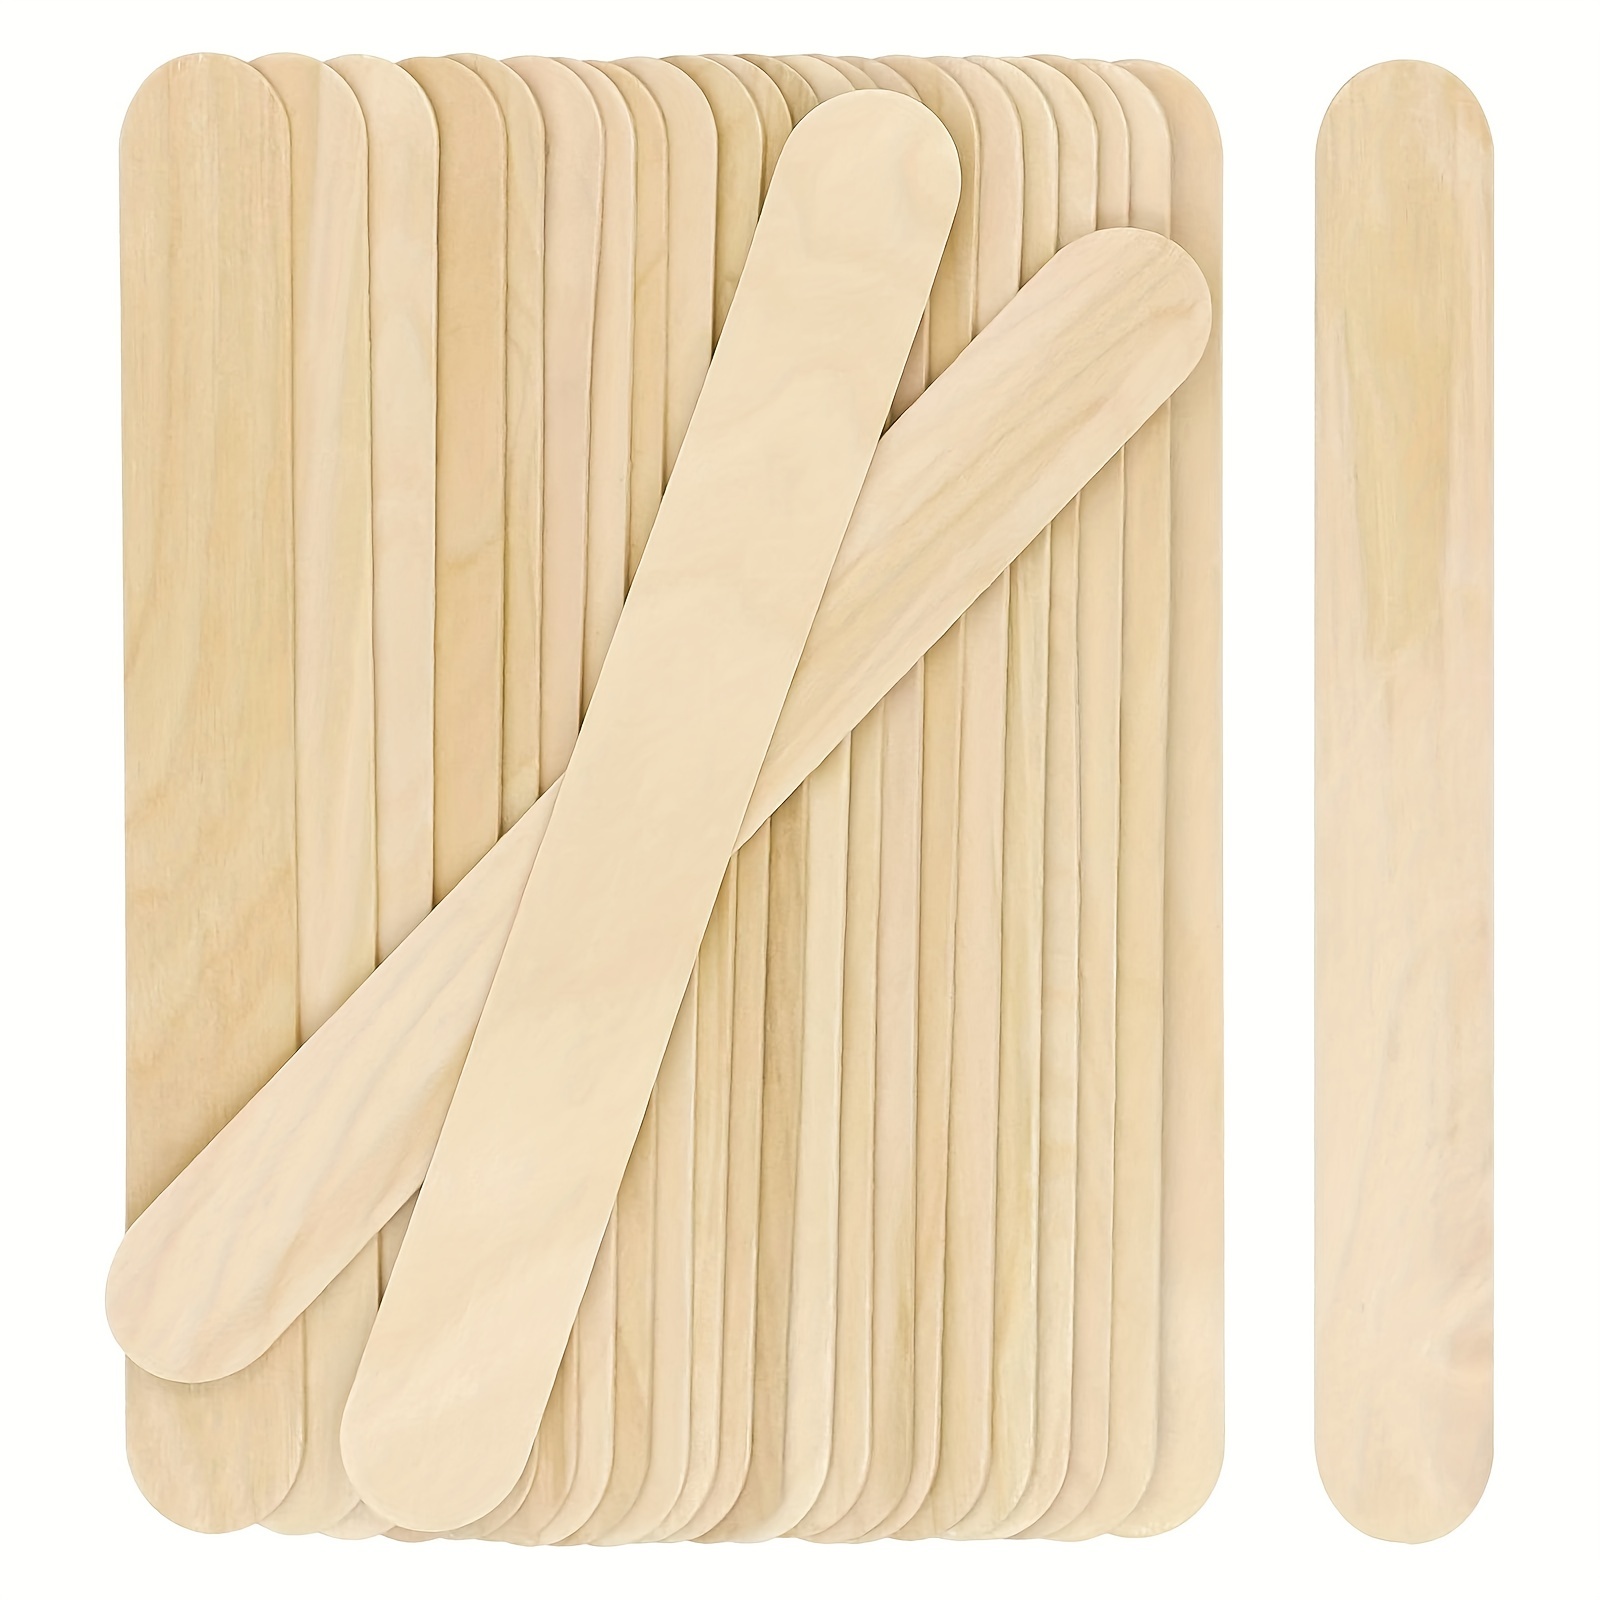 300 Pack Small Wooden Popsicle Sticks for Crafts, Bulk Small Wood Sticks for DIY